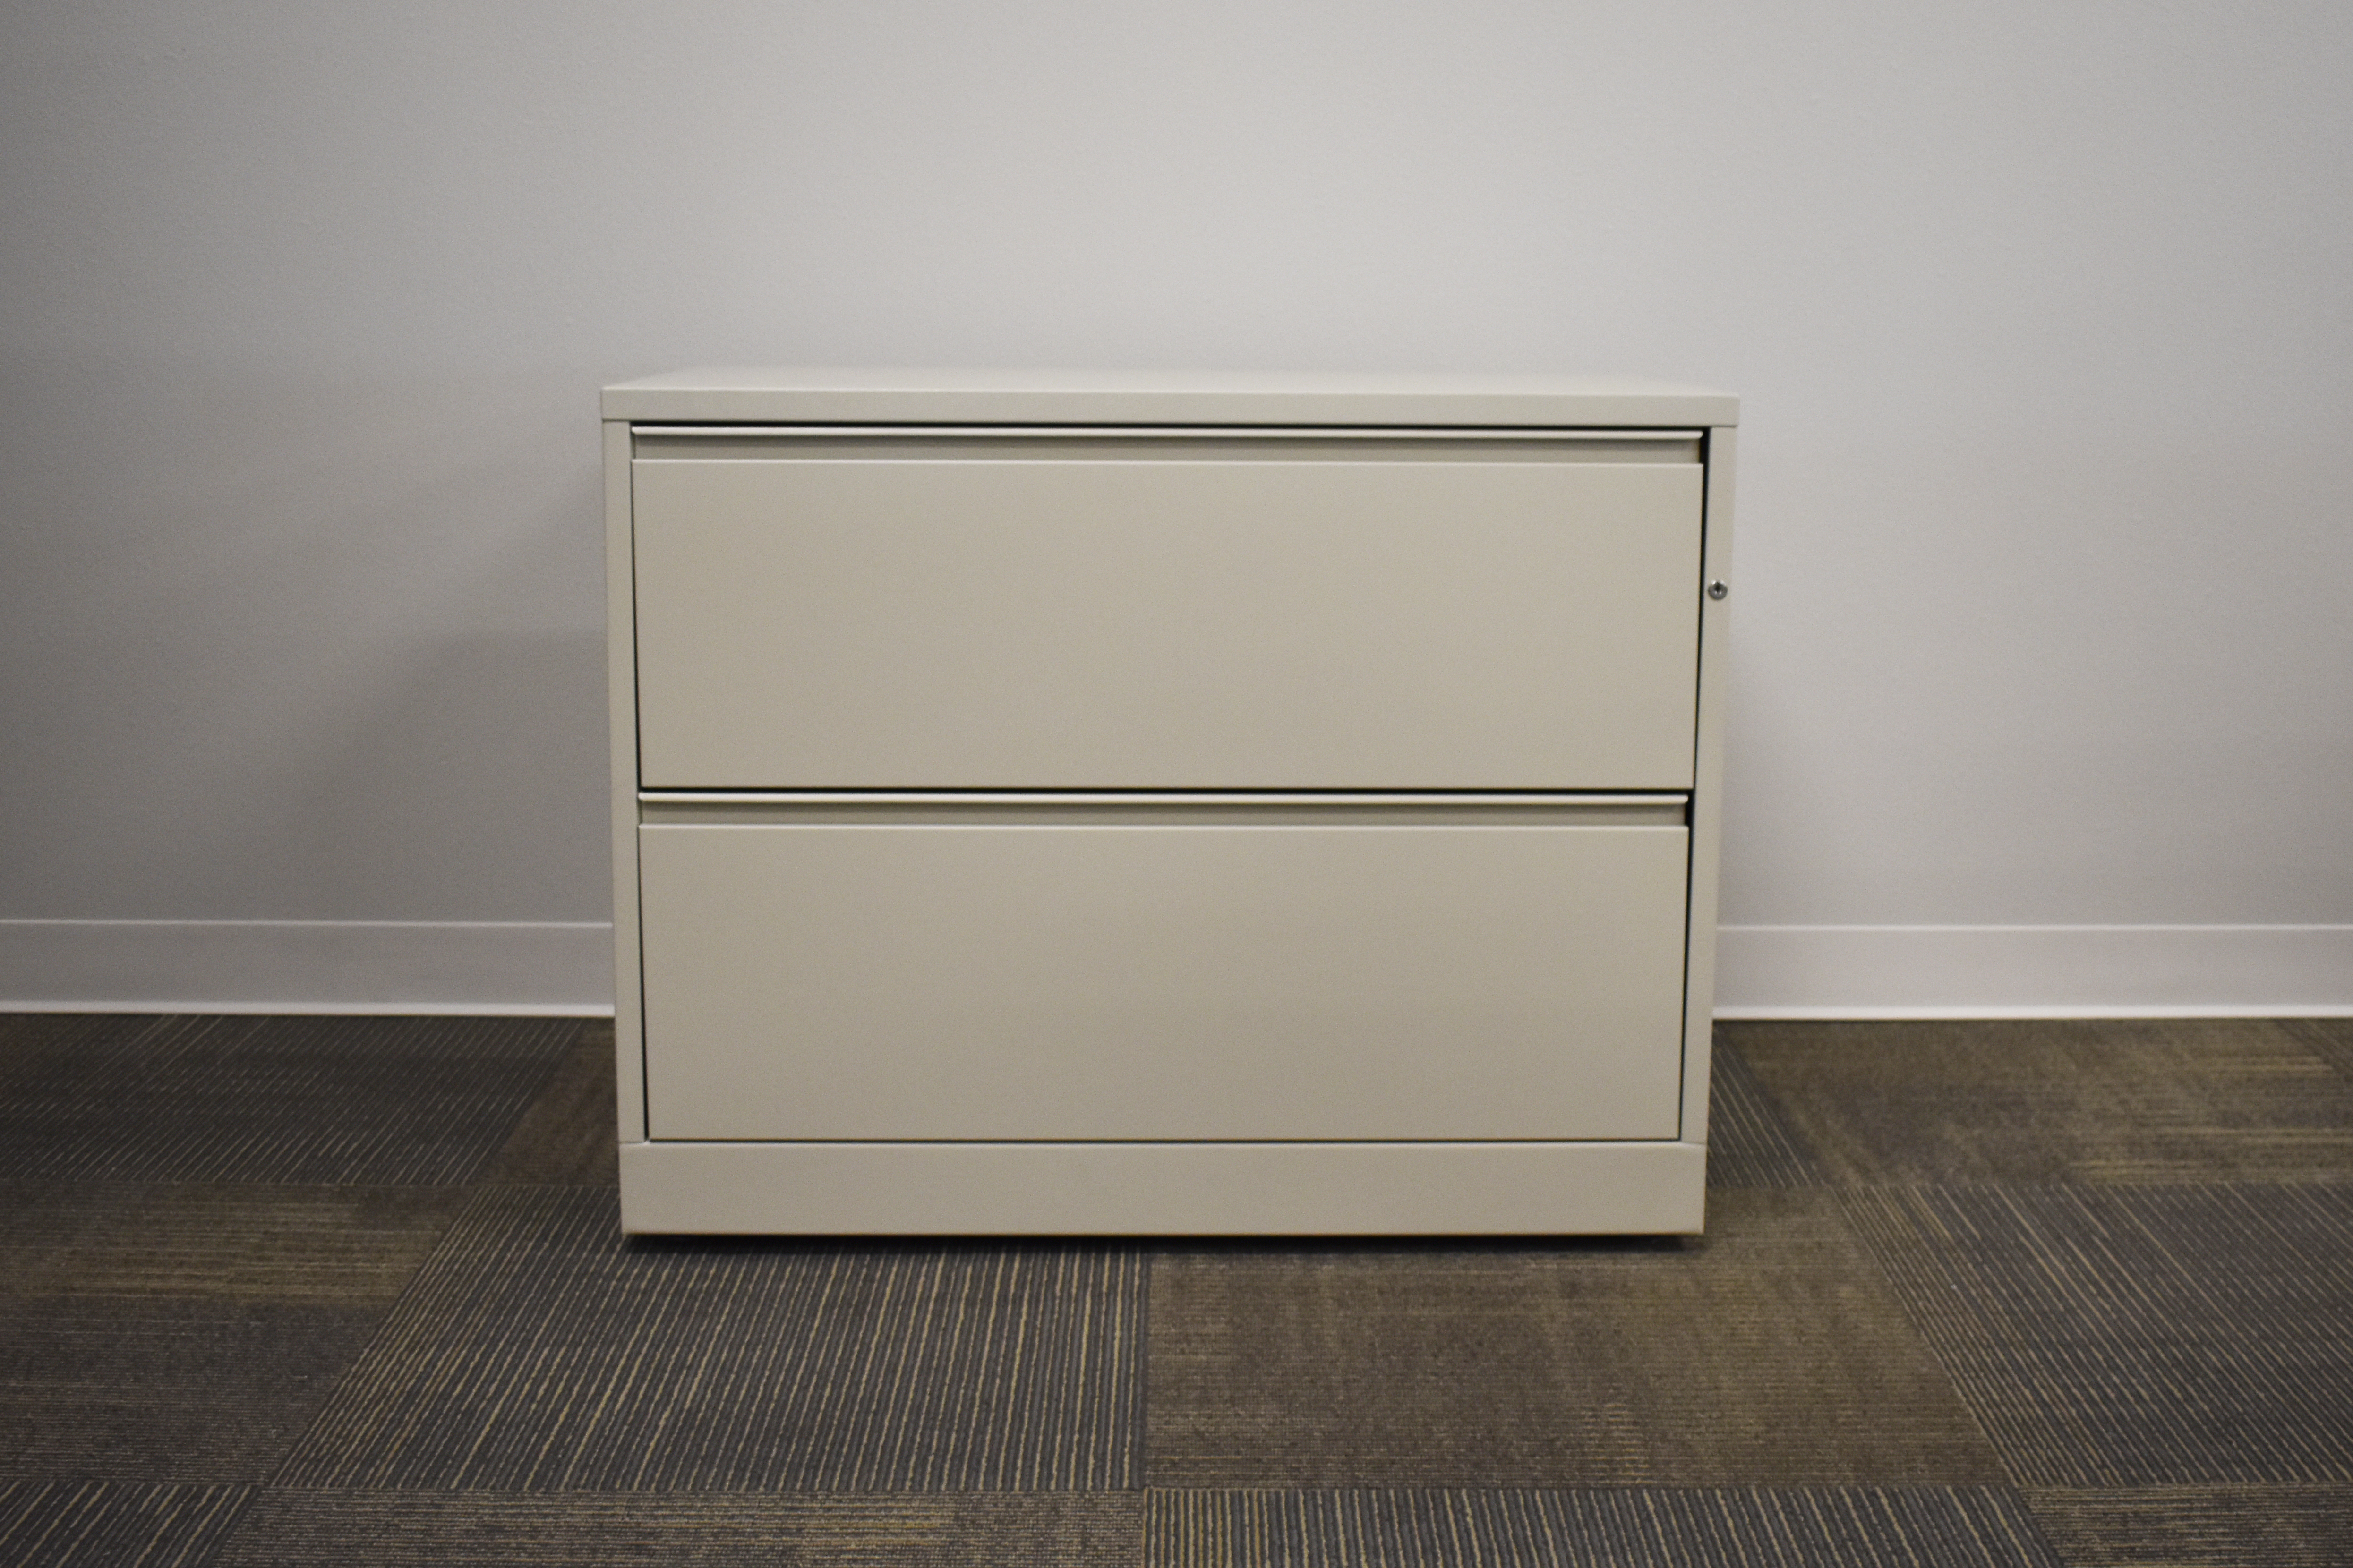 Herman Miller Lateral File Cabinets 2 3 4 Drawer Office in measurements 4981 X 3320